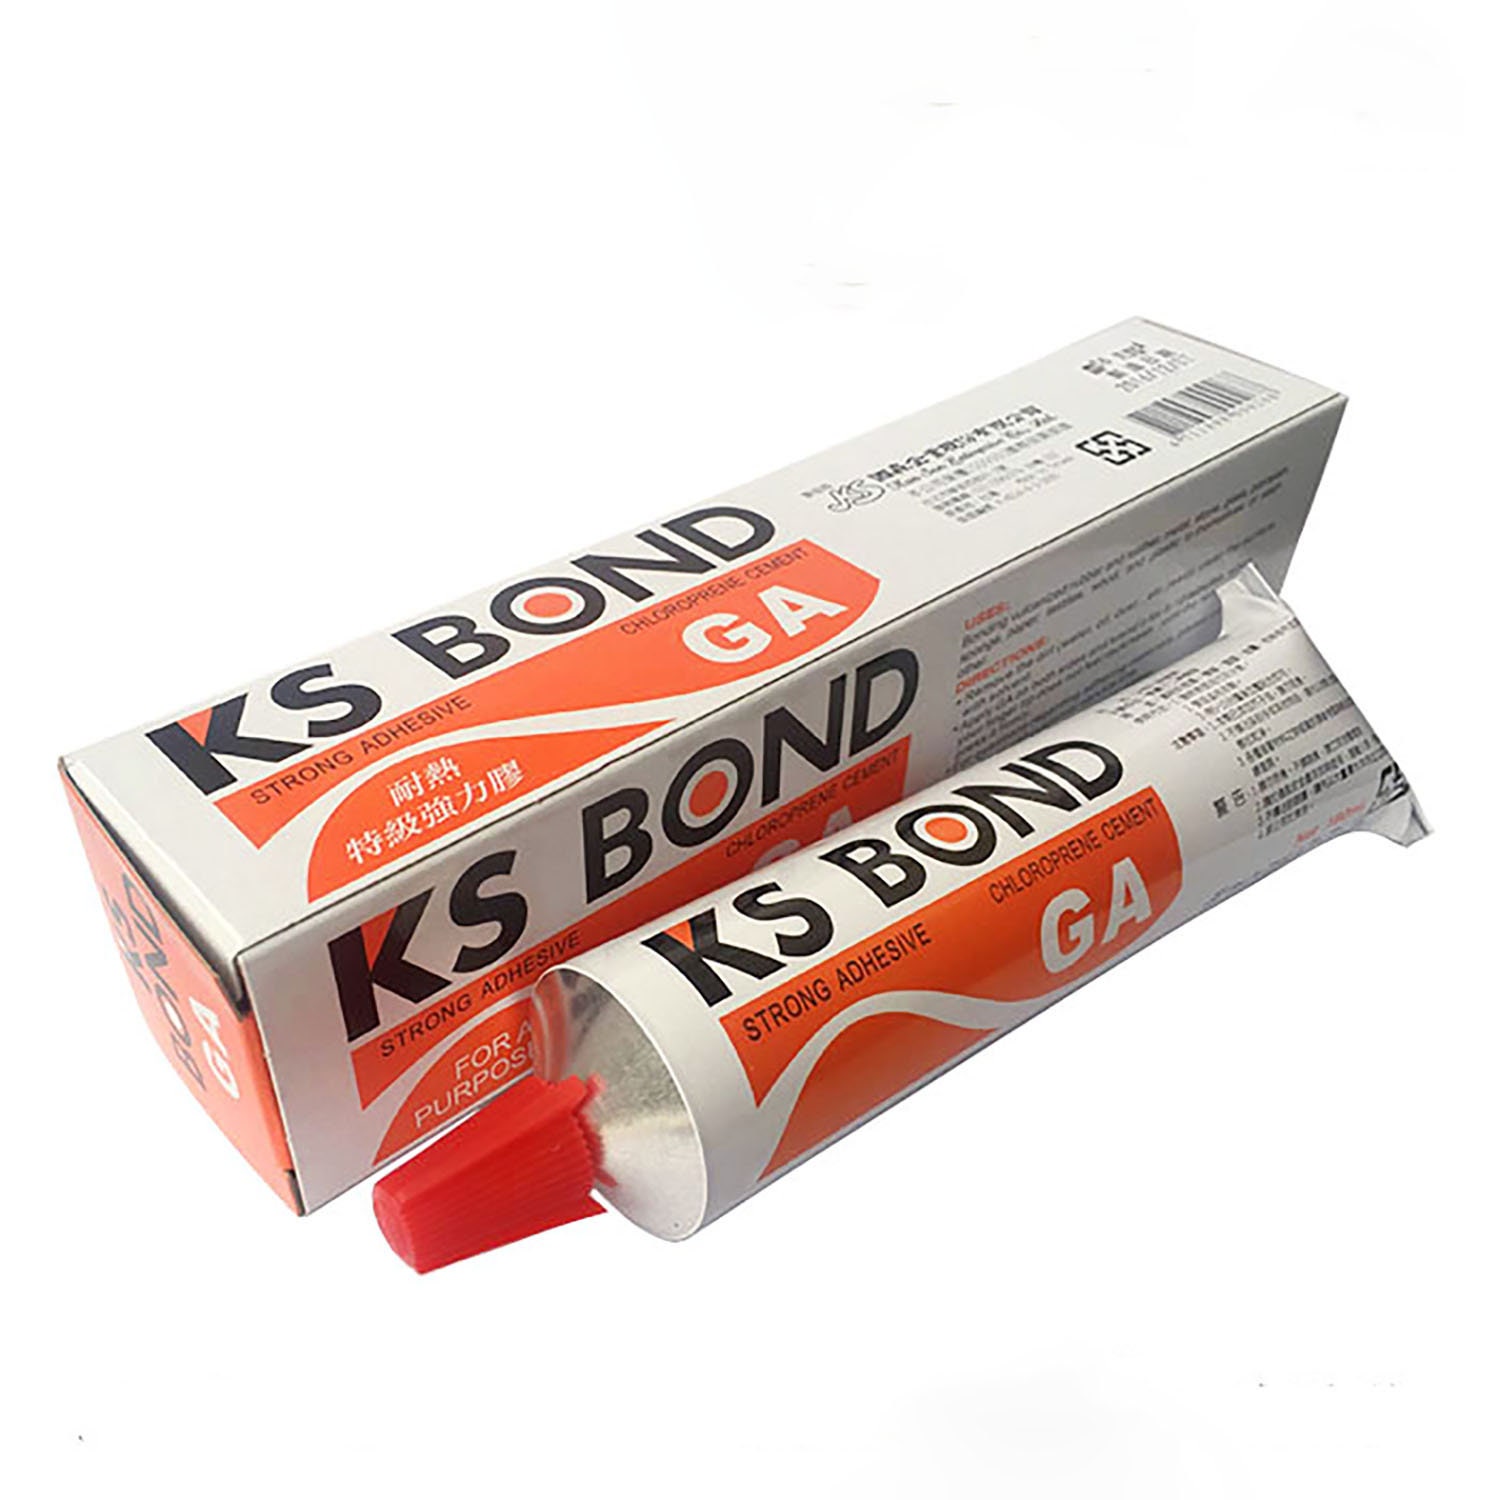 E6000 Industrial Strength Adhesive Permanent Bond Glue From USA 59.1ml 